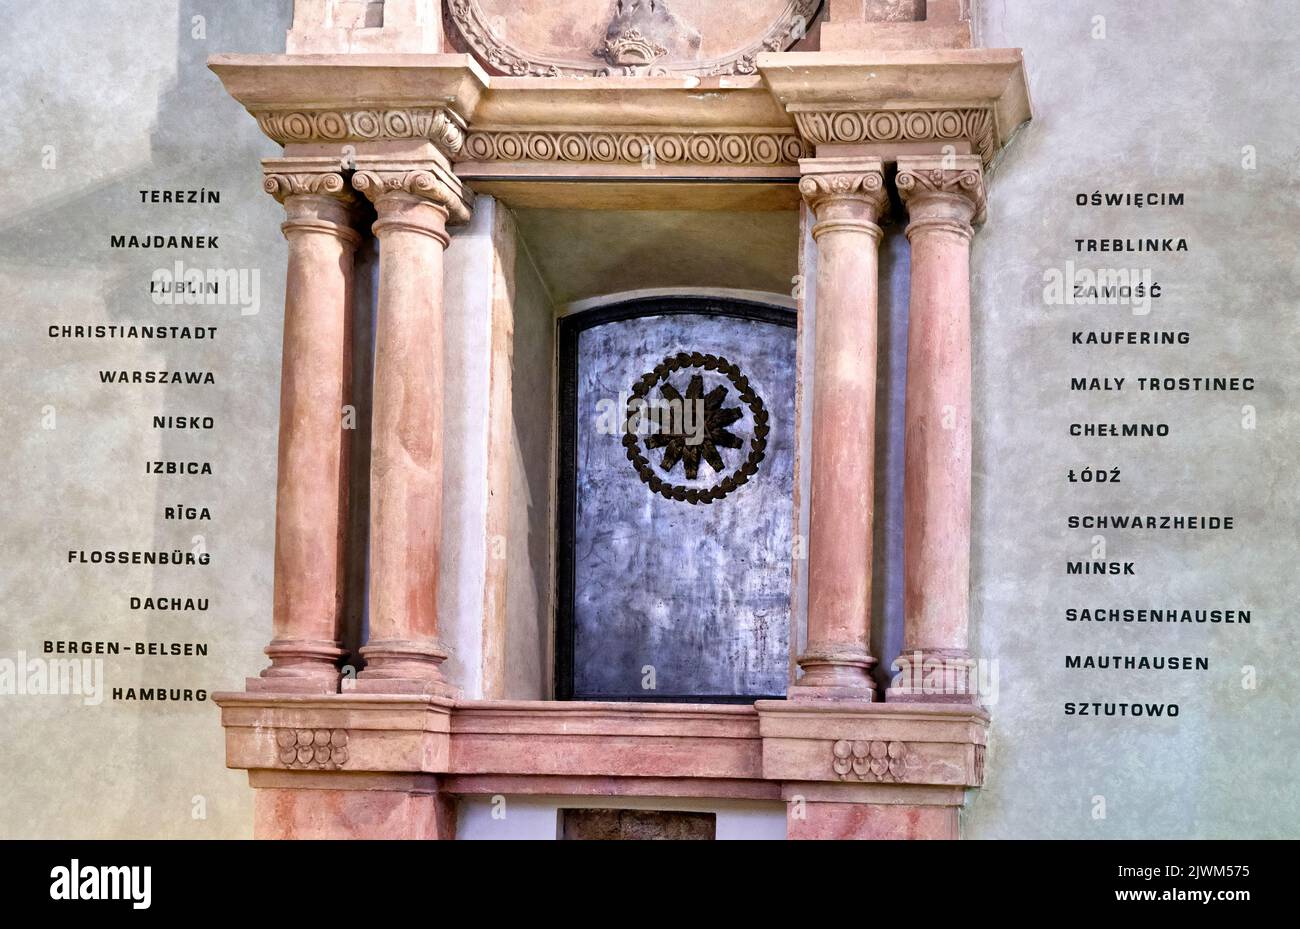 Prague, Czechia, August 29, 2022: Holocaust Memorial at Pinkasova Synagogue with a list of concentration camps where the Nazis murdered Jews. Stock Photo